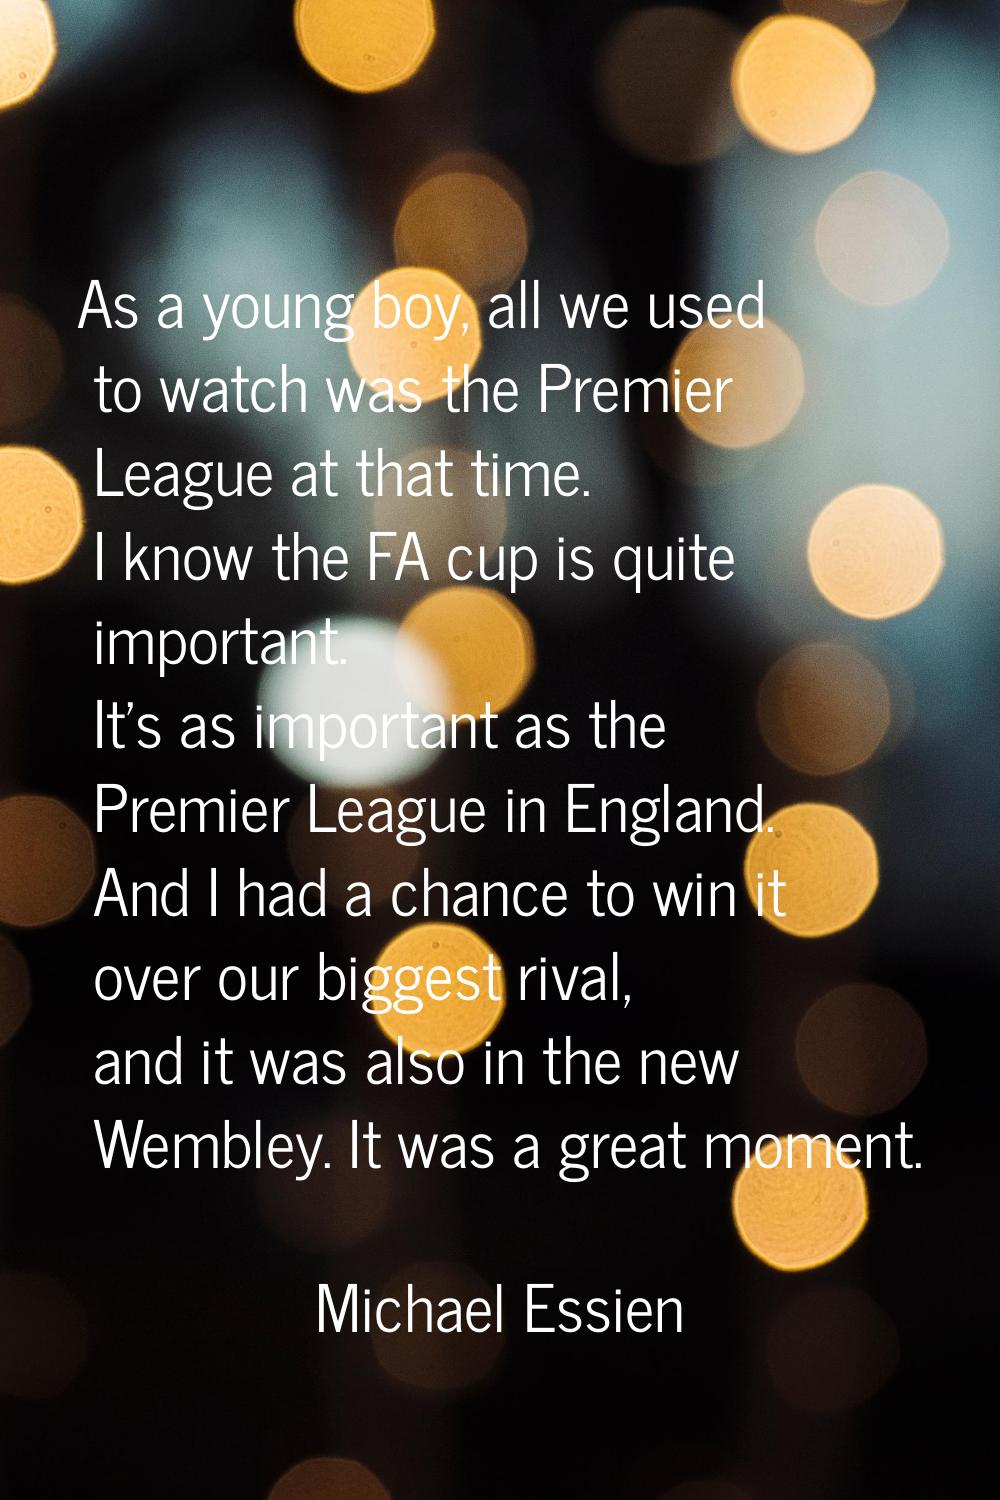 As a young boy, all we used to watch was the Premier League at that time. I know the FA cup is quit